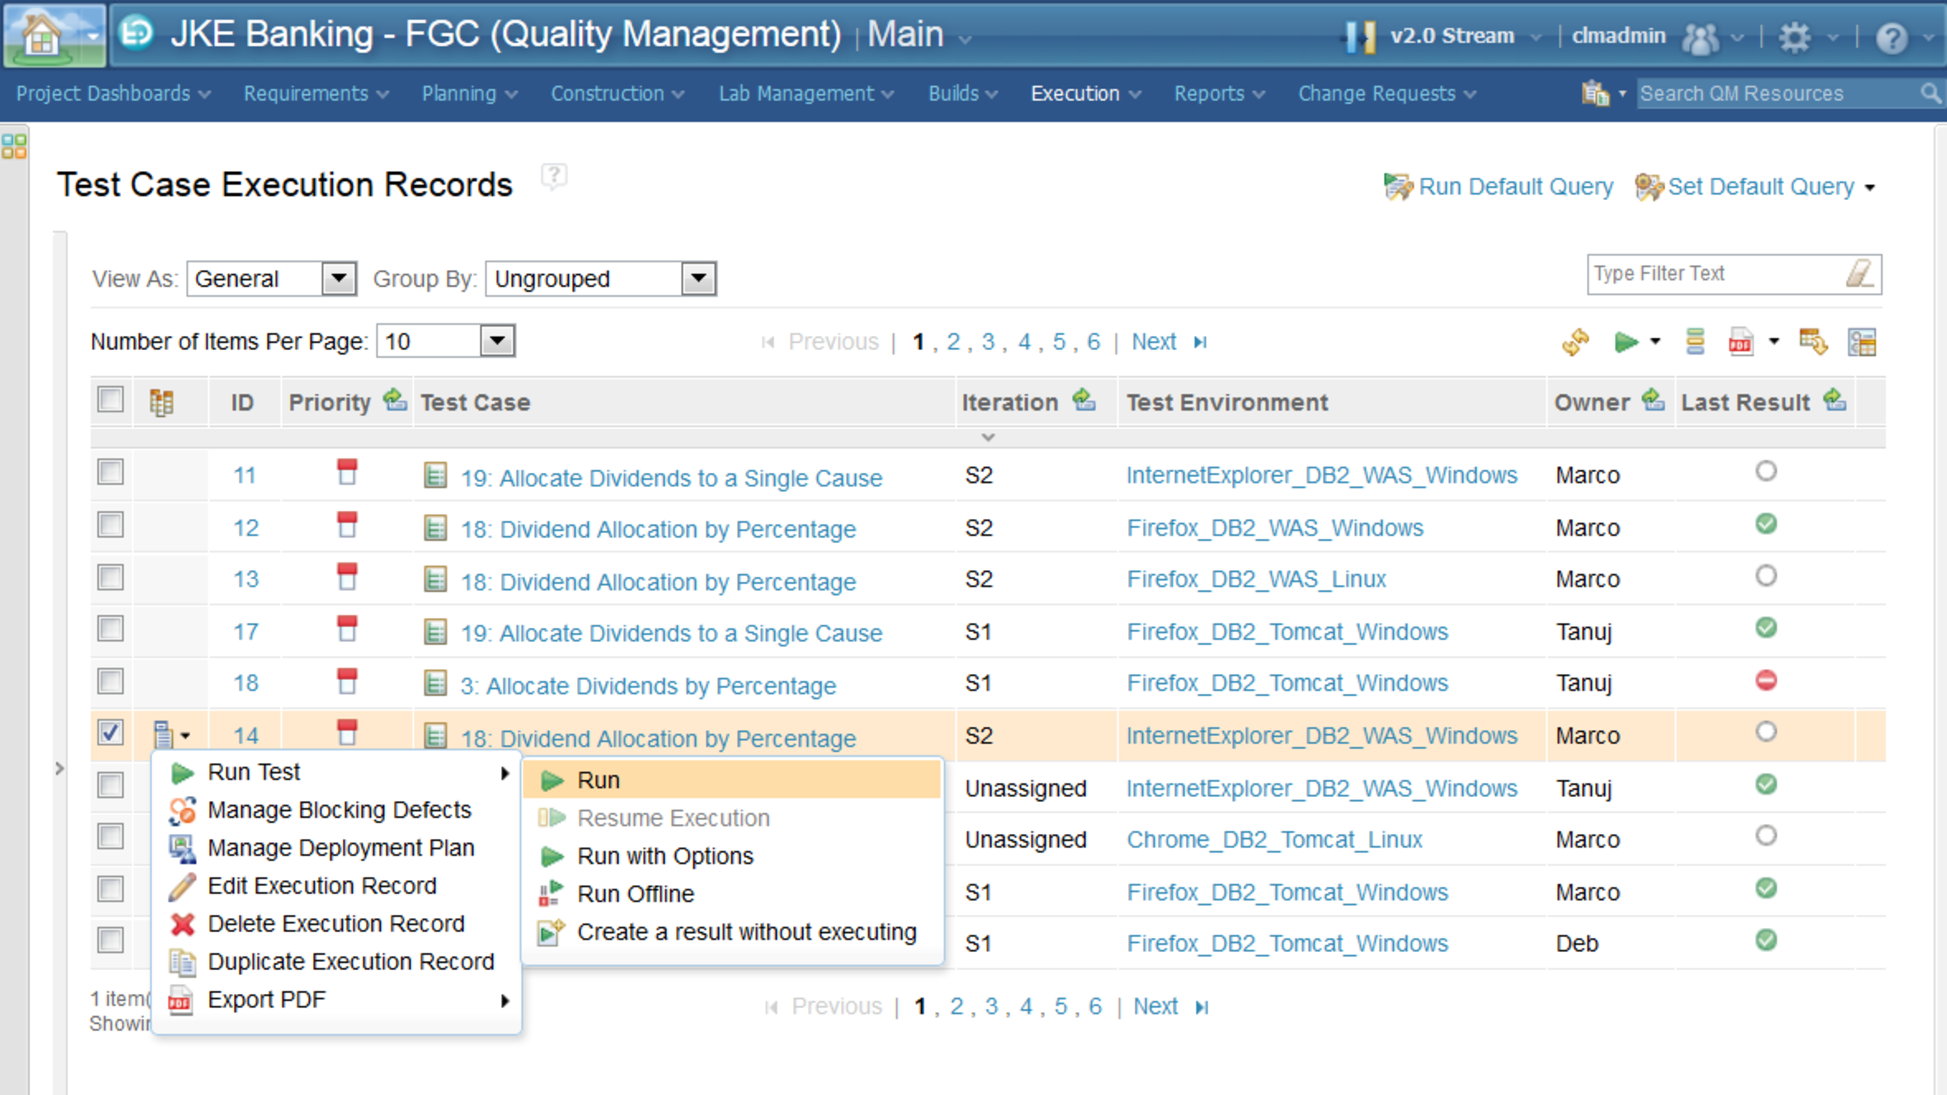 User interface of Test Case Execution Records